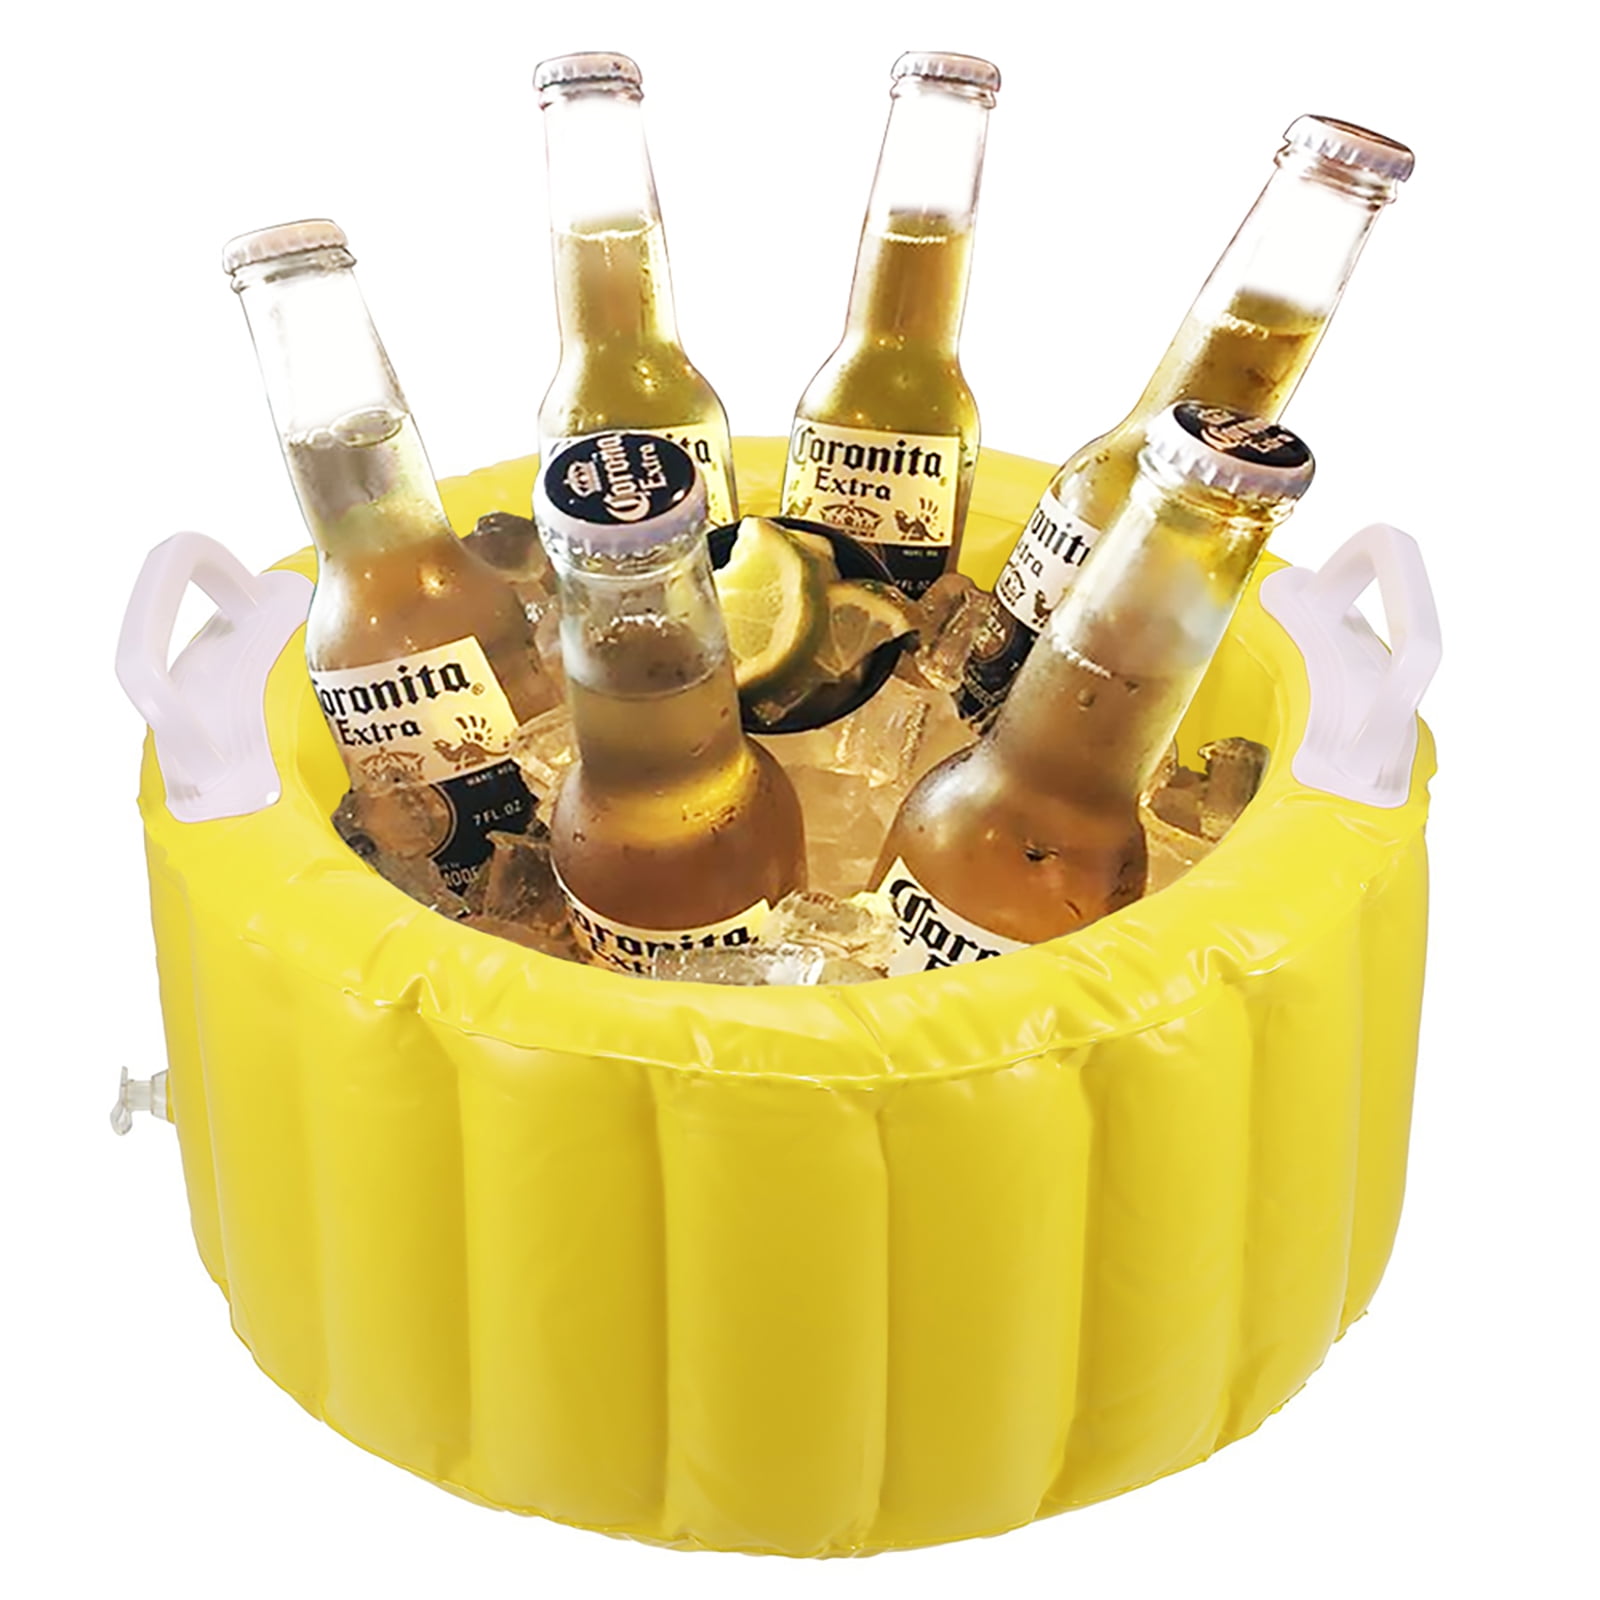 3 Gallons Ice Float Beverage Tub Beer Ice Cooler Large for Party, Beach, Pool and Jacuzzi - Walmart.com